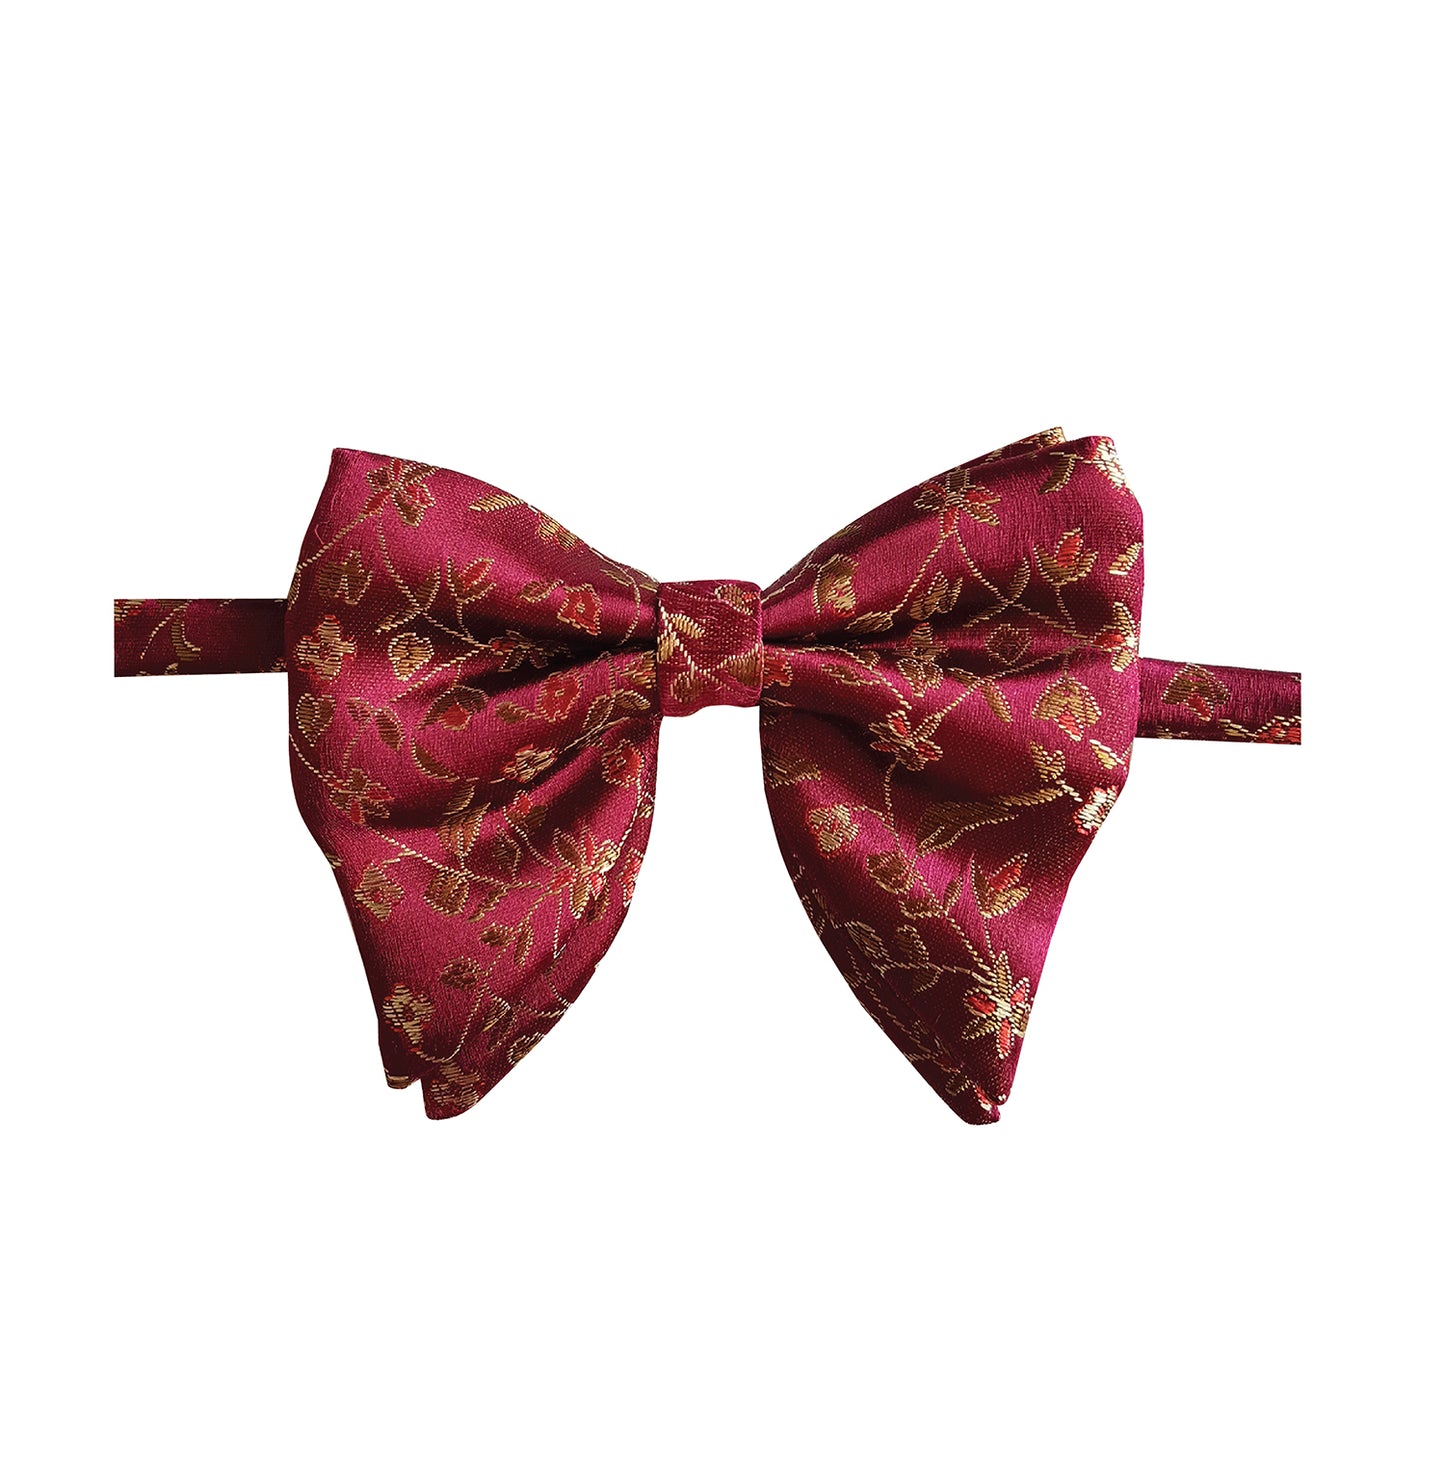 THE HUA MA BOWTIE (BUTTERFLY)